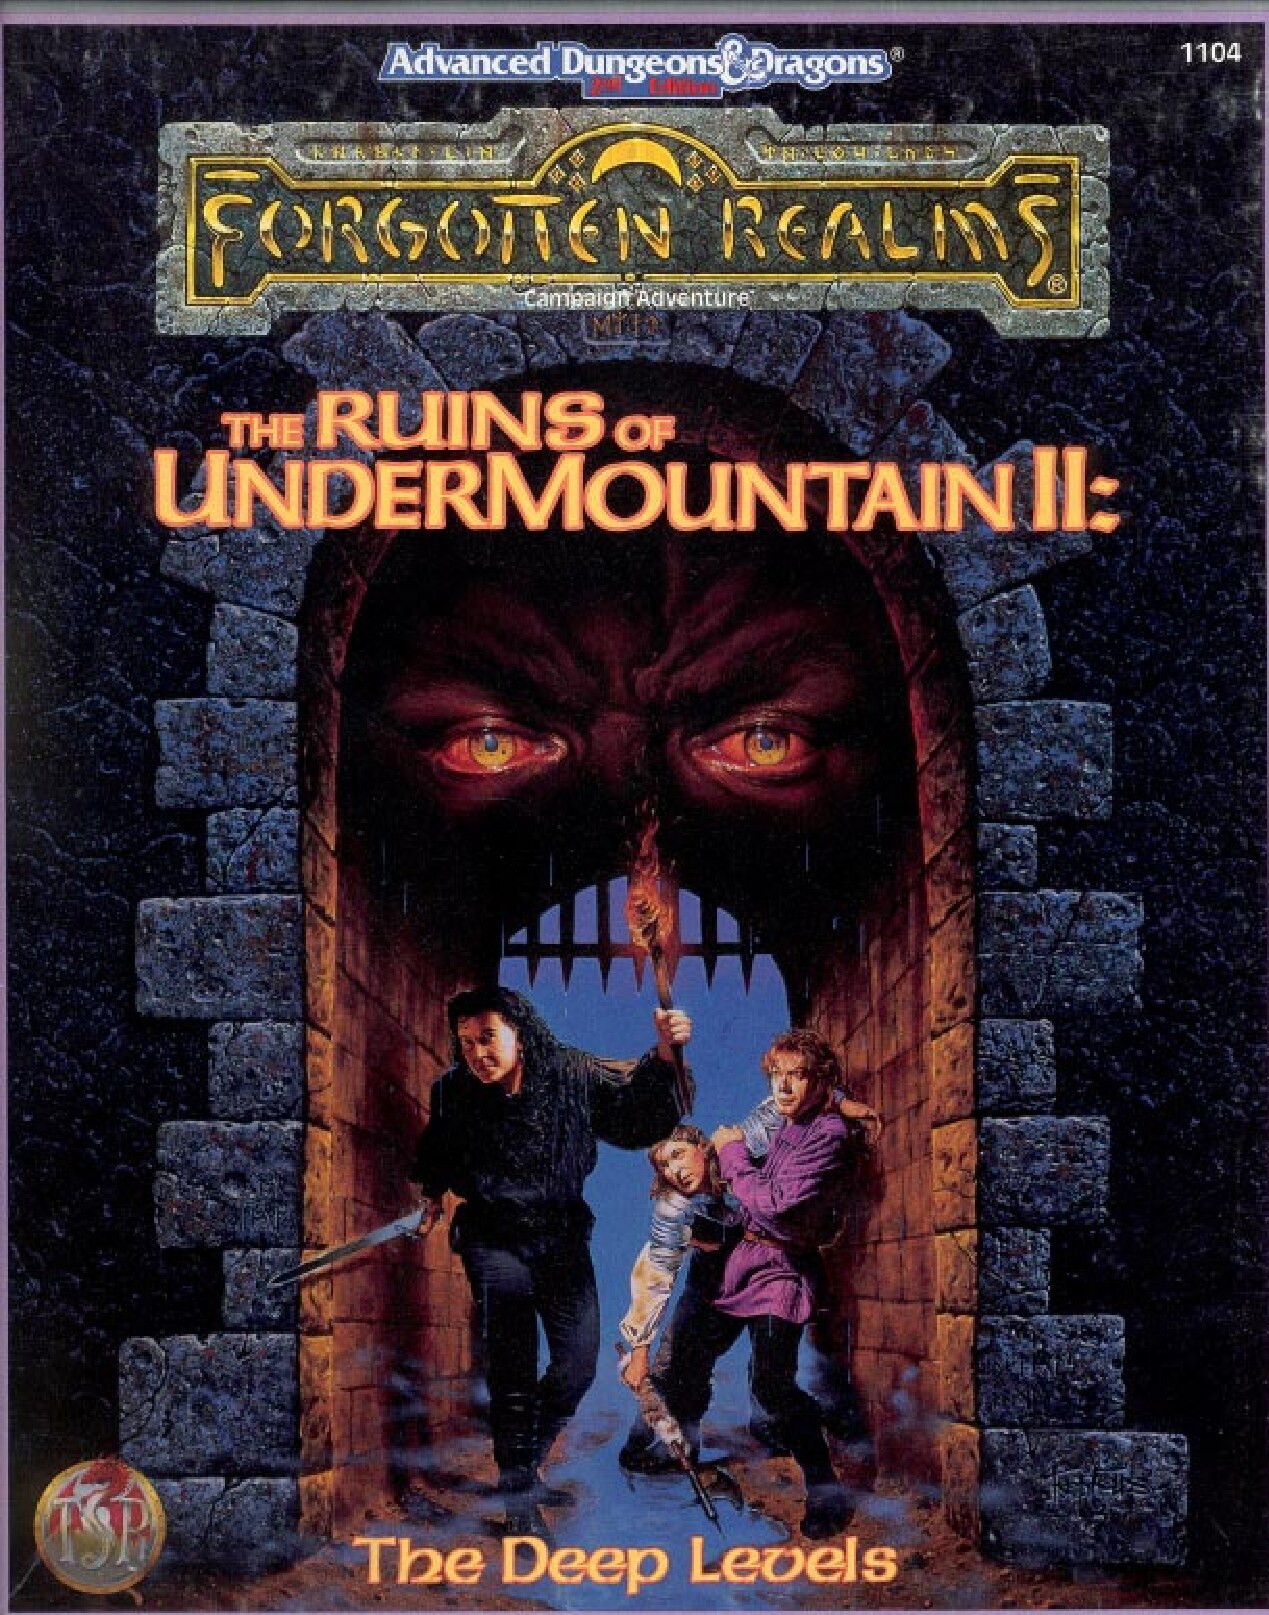 The Ruins of Undermountain II: The Deep Levels